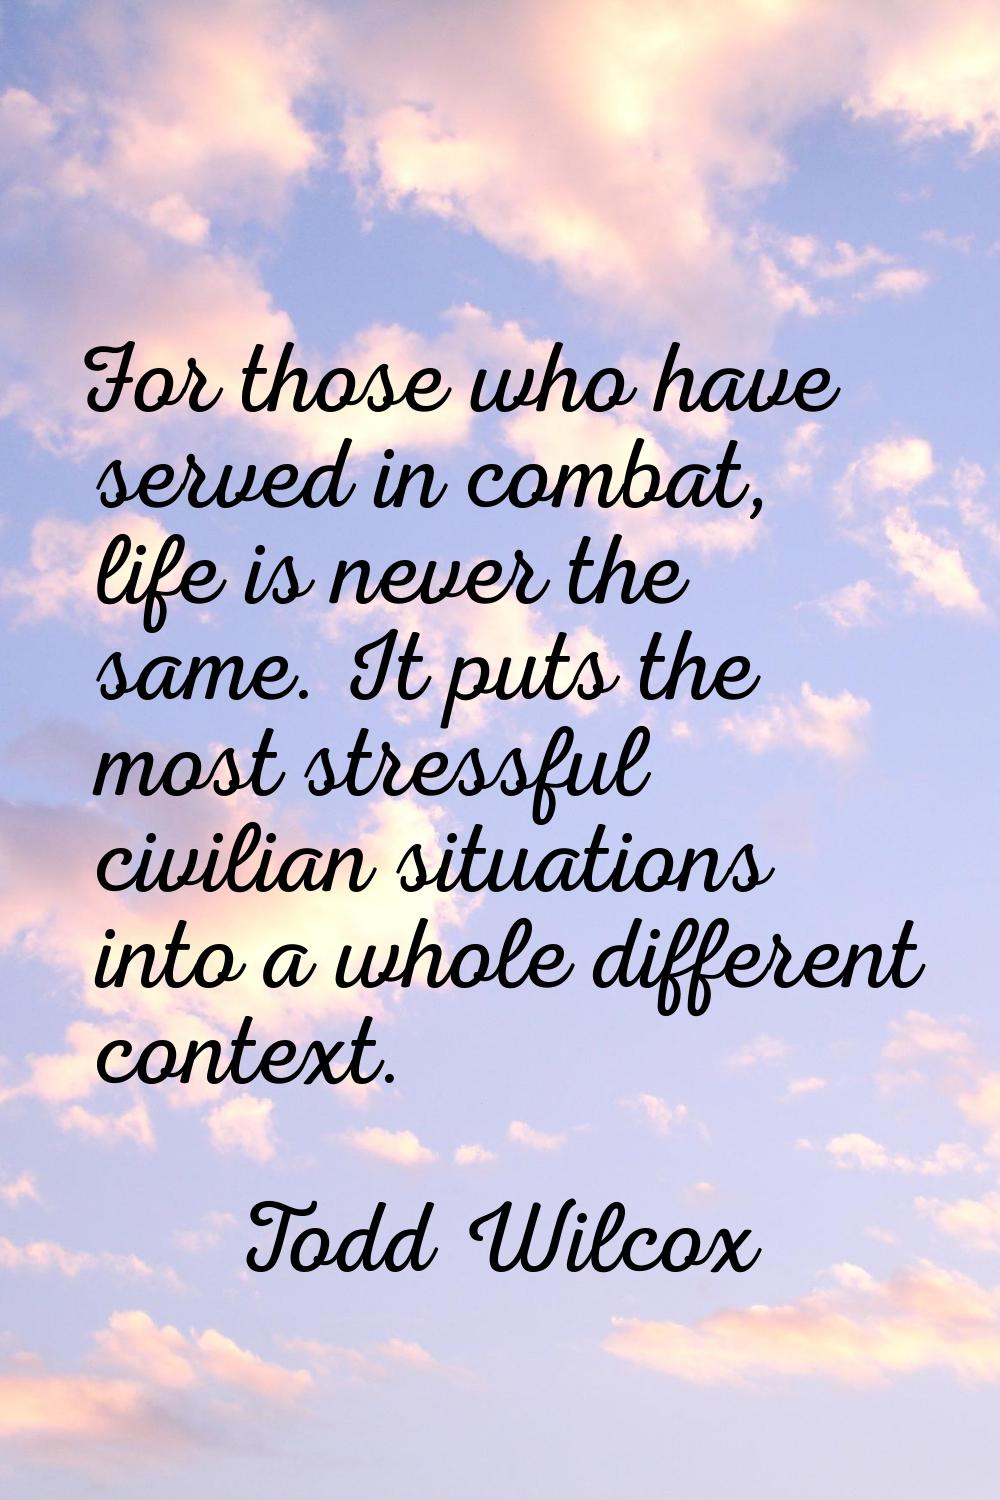 For those who have served in combat, life is never the same. It puts the most stressful civilian si